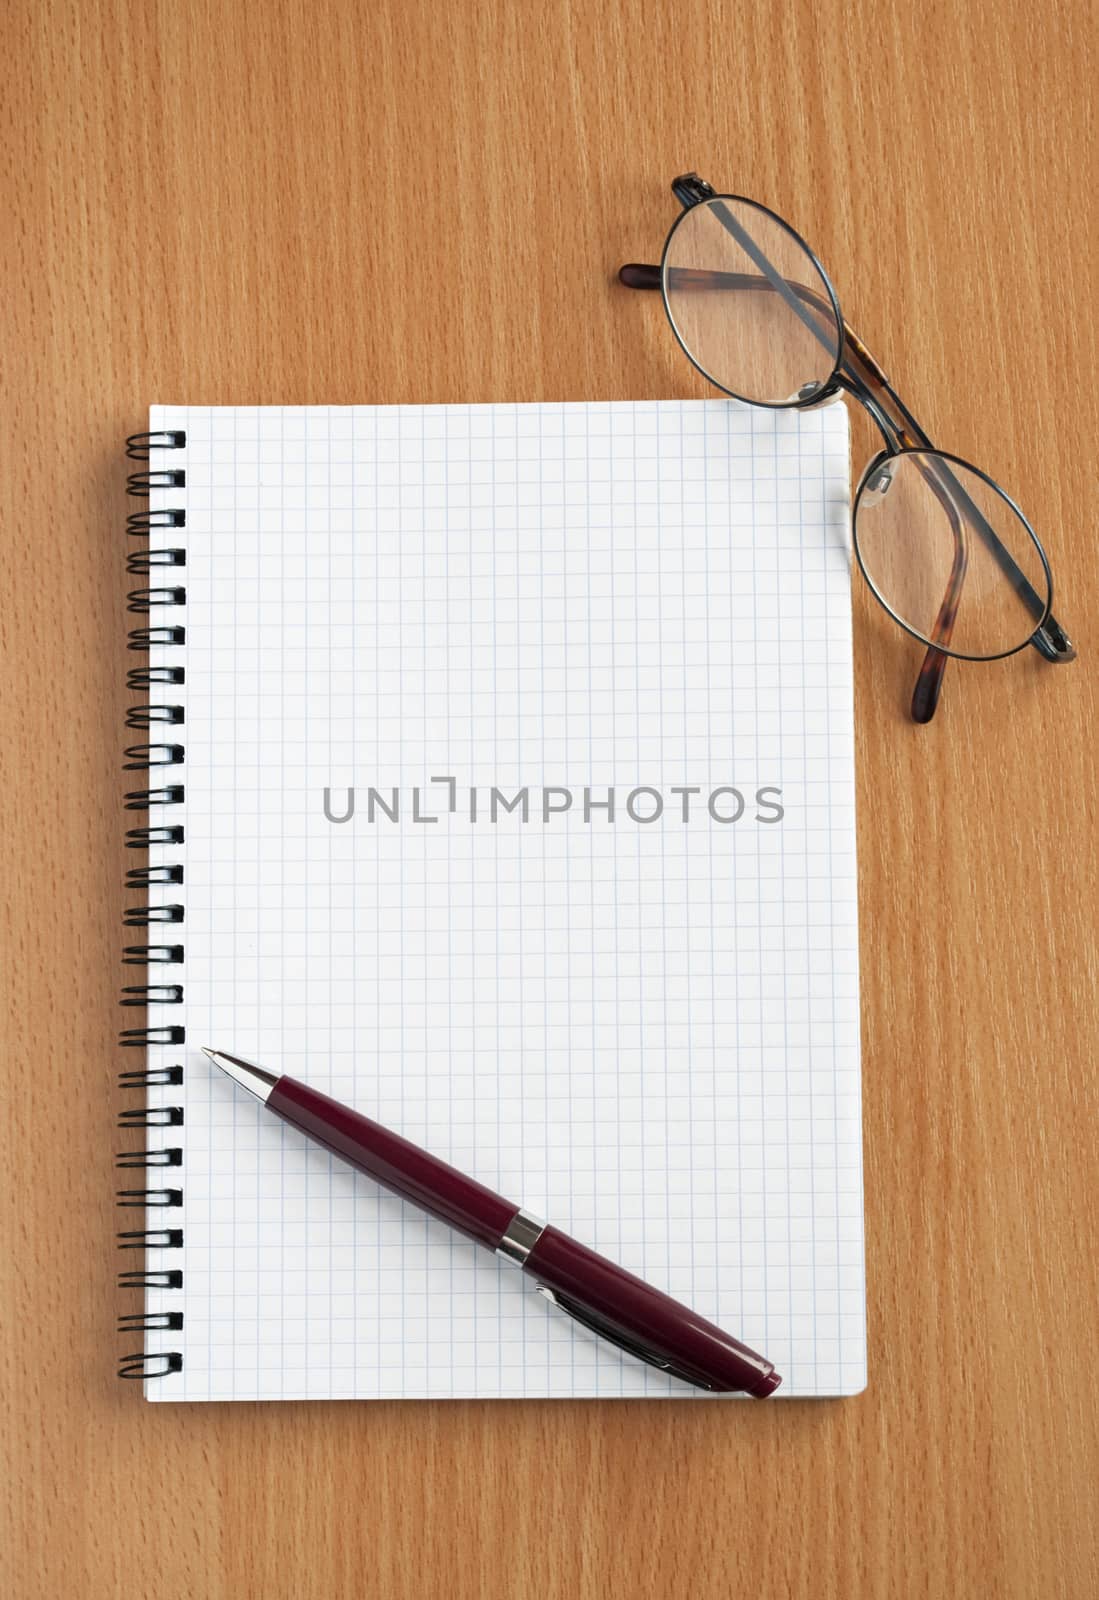 Notebook, glasses and pen on the table.